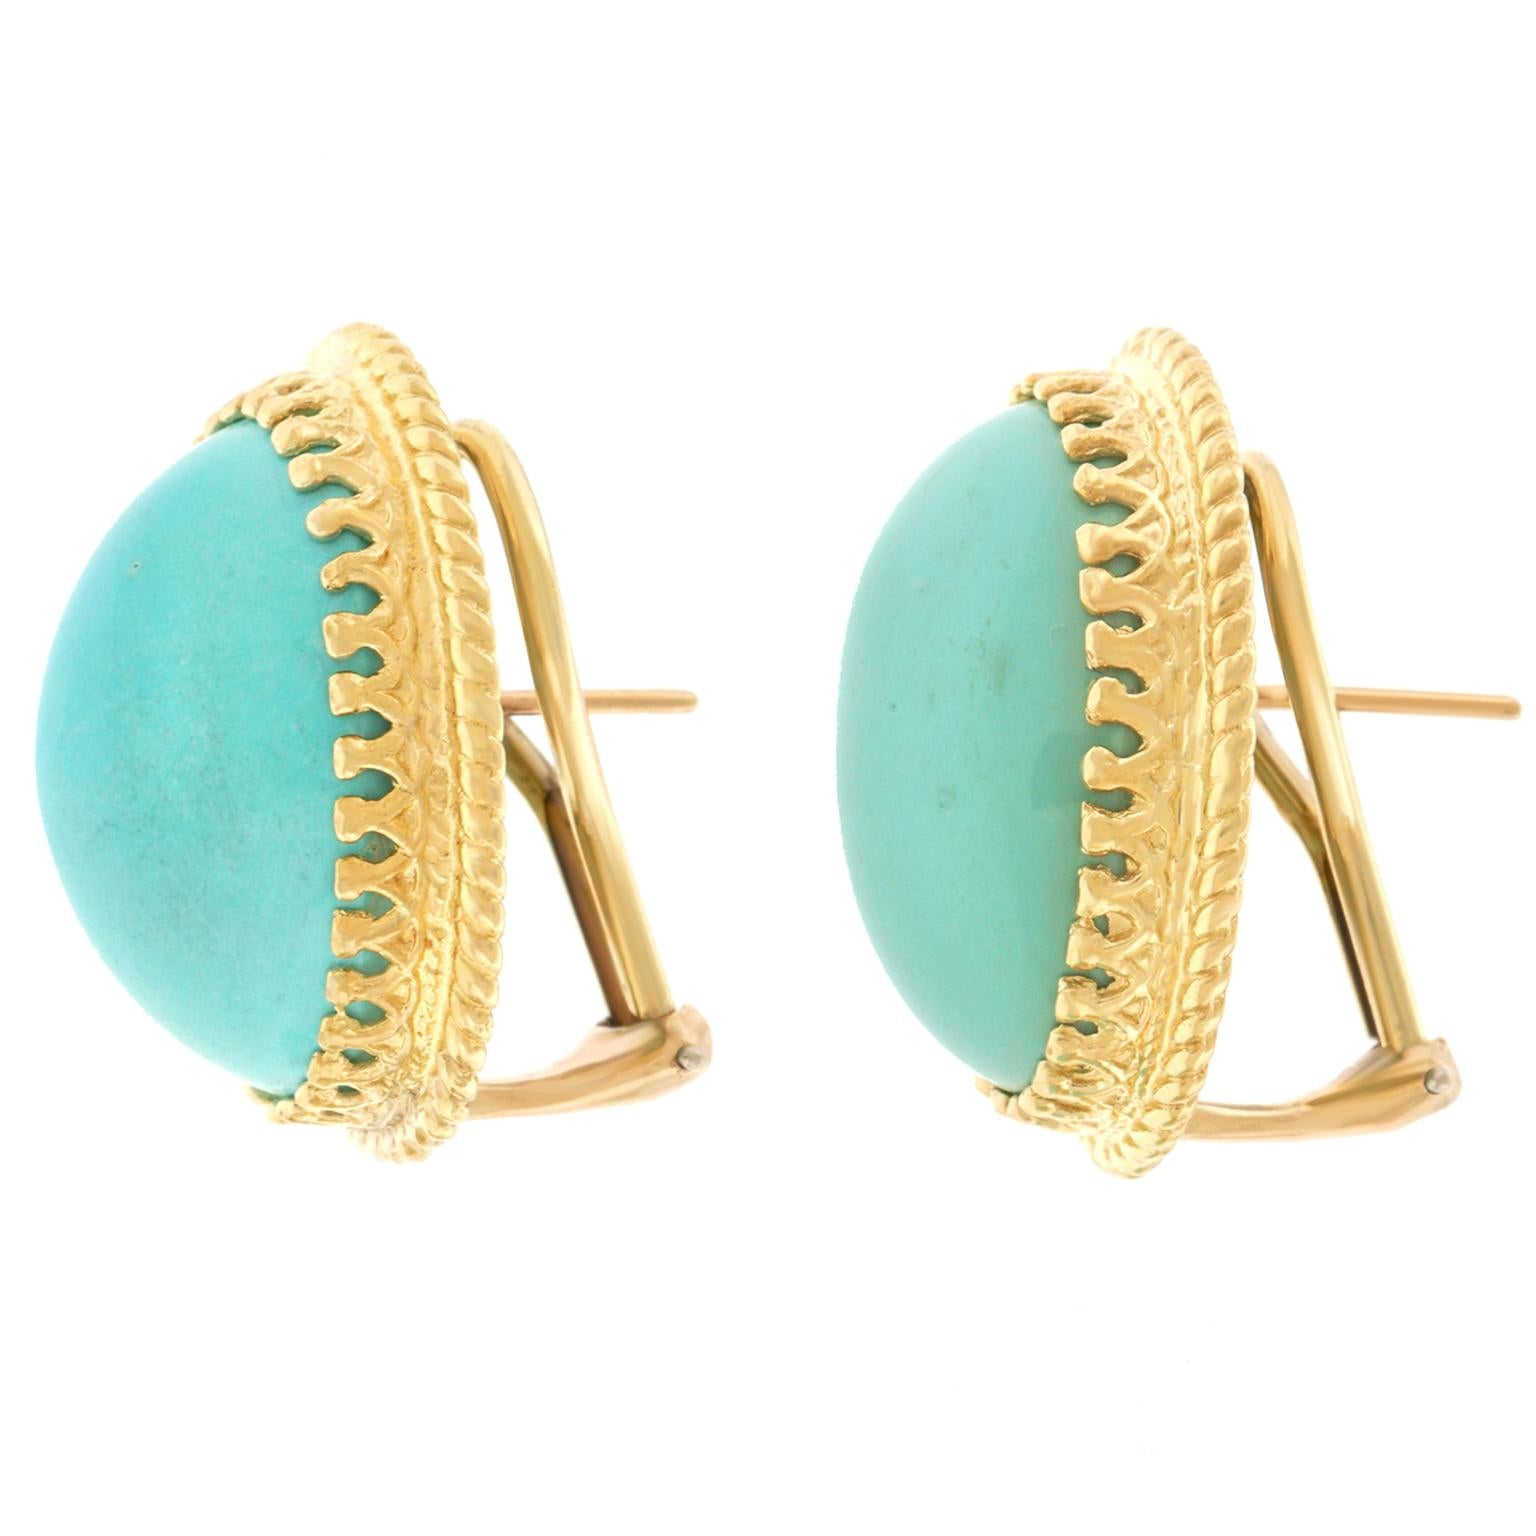 Cellino Persian Turquoise-Set Gold Earrings 1